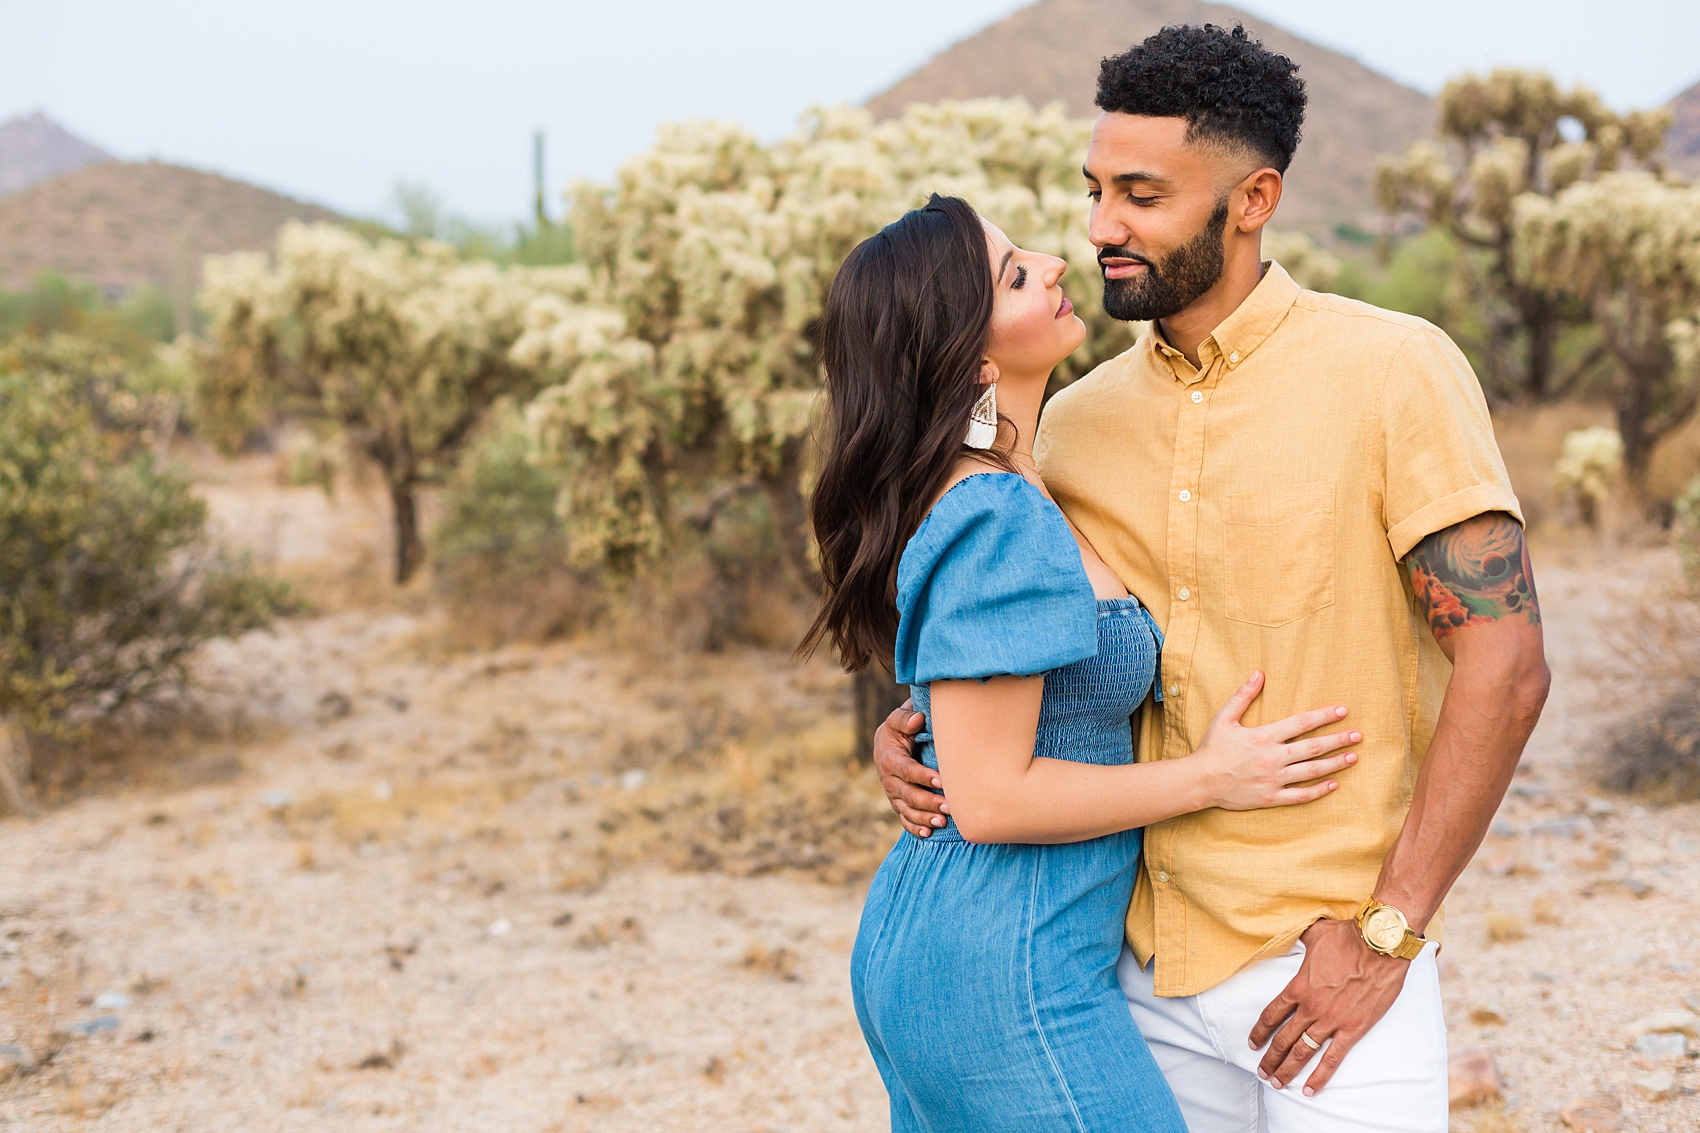 Leah Hope Photography | Scottsdale Phoenix Arizona | Desert Landscape Cactus Scenery | Couple Photos | In Love | Romantic Couple Pictures | Baby Announcement | Baby Surprise | What to Wear | How to Pose | Couple Poses | Portrait Photographer | Engagement Photography 